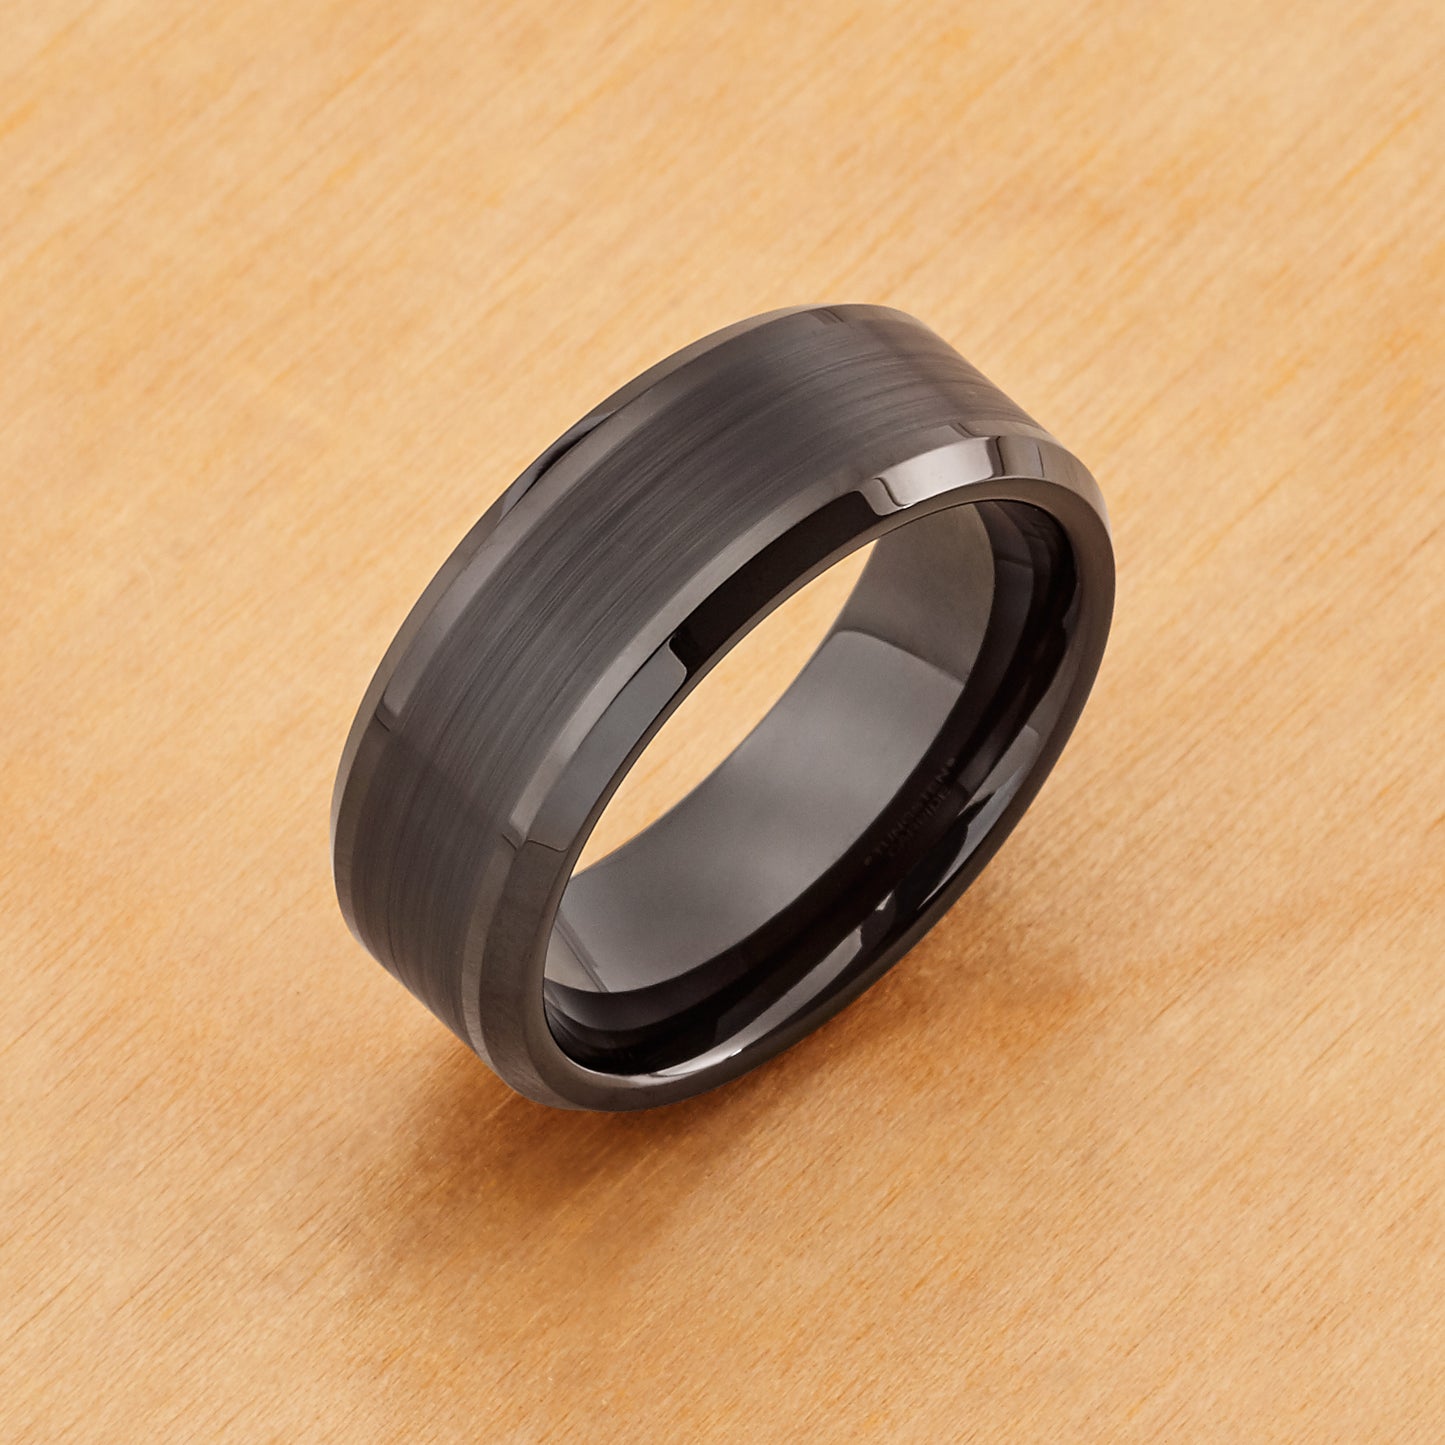 TR663 - Tungsten Ring 8mm, Black IP Plated Brushed Center Shiny on each side Beveled Edge